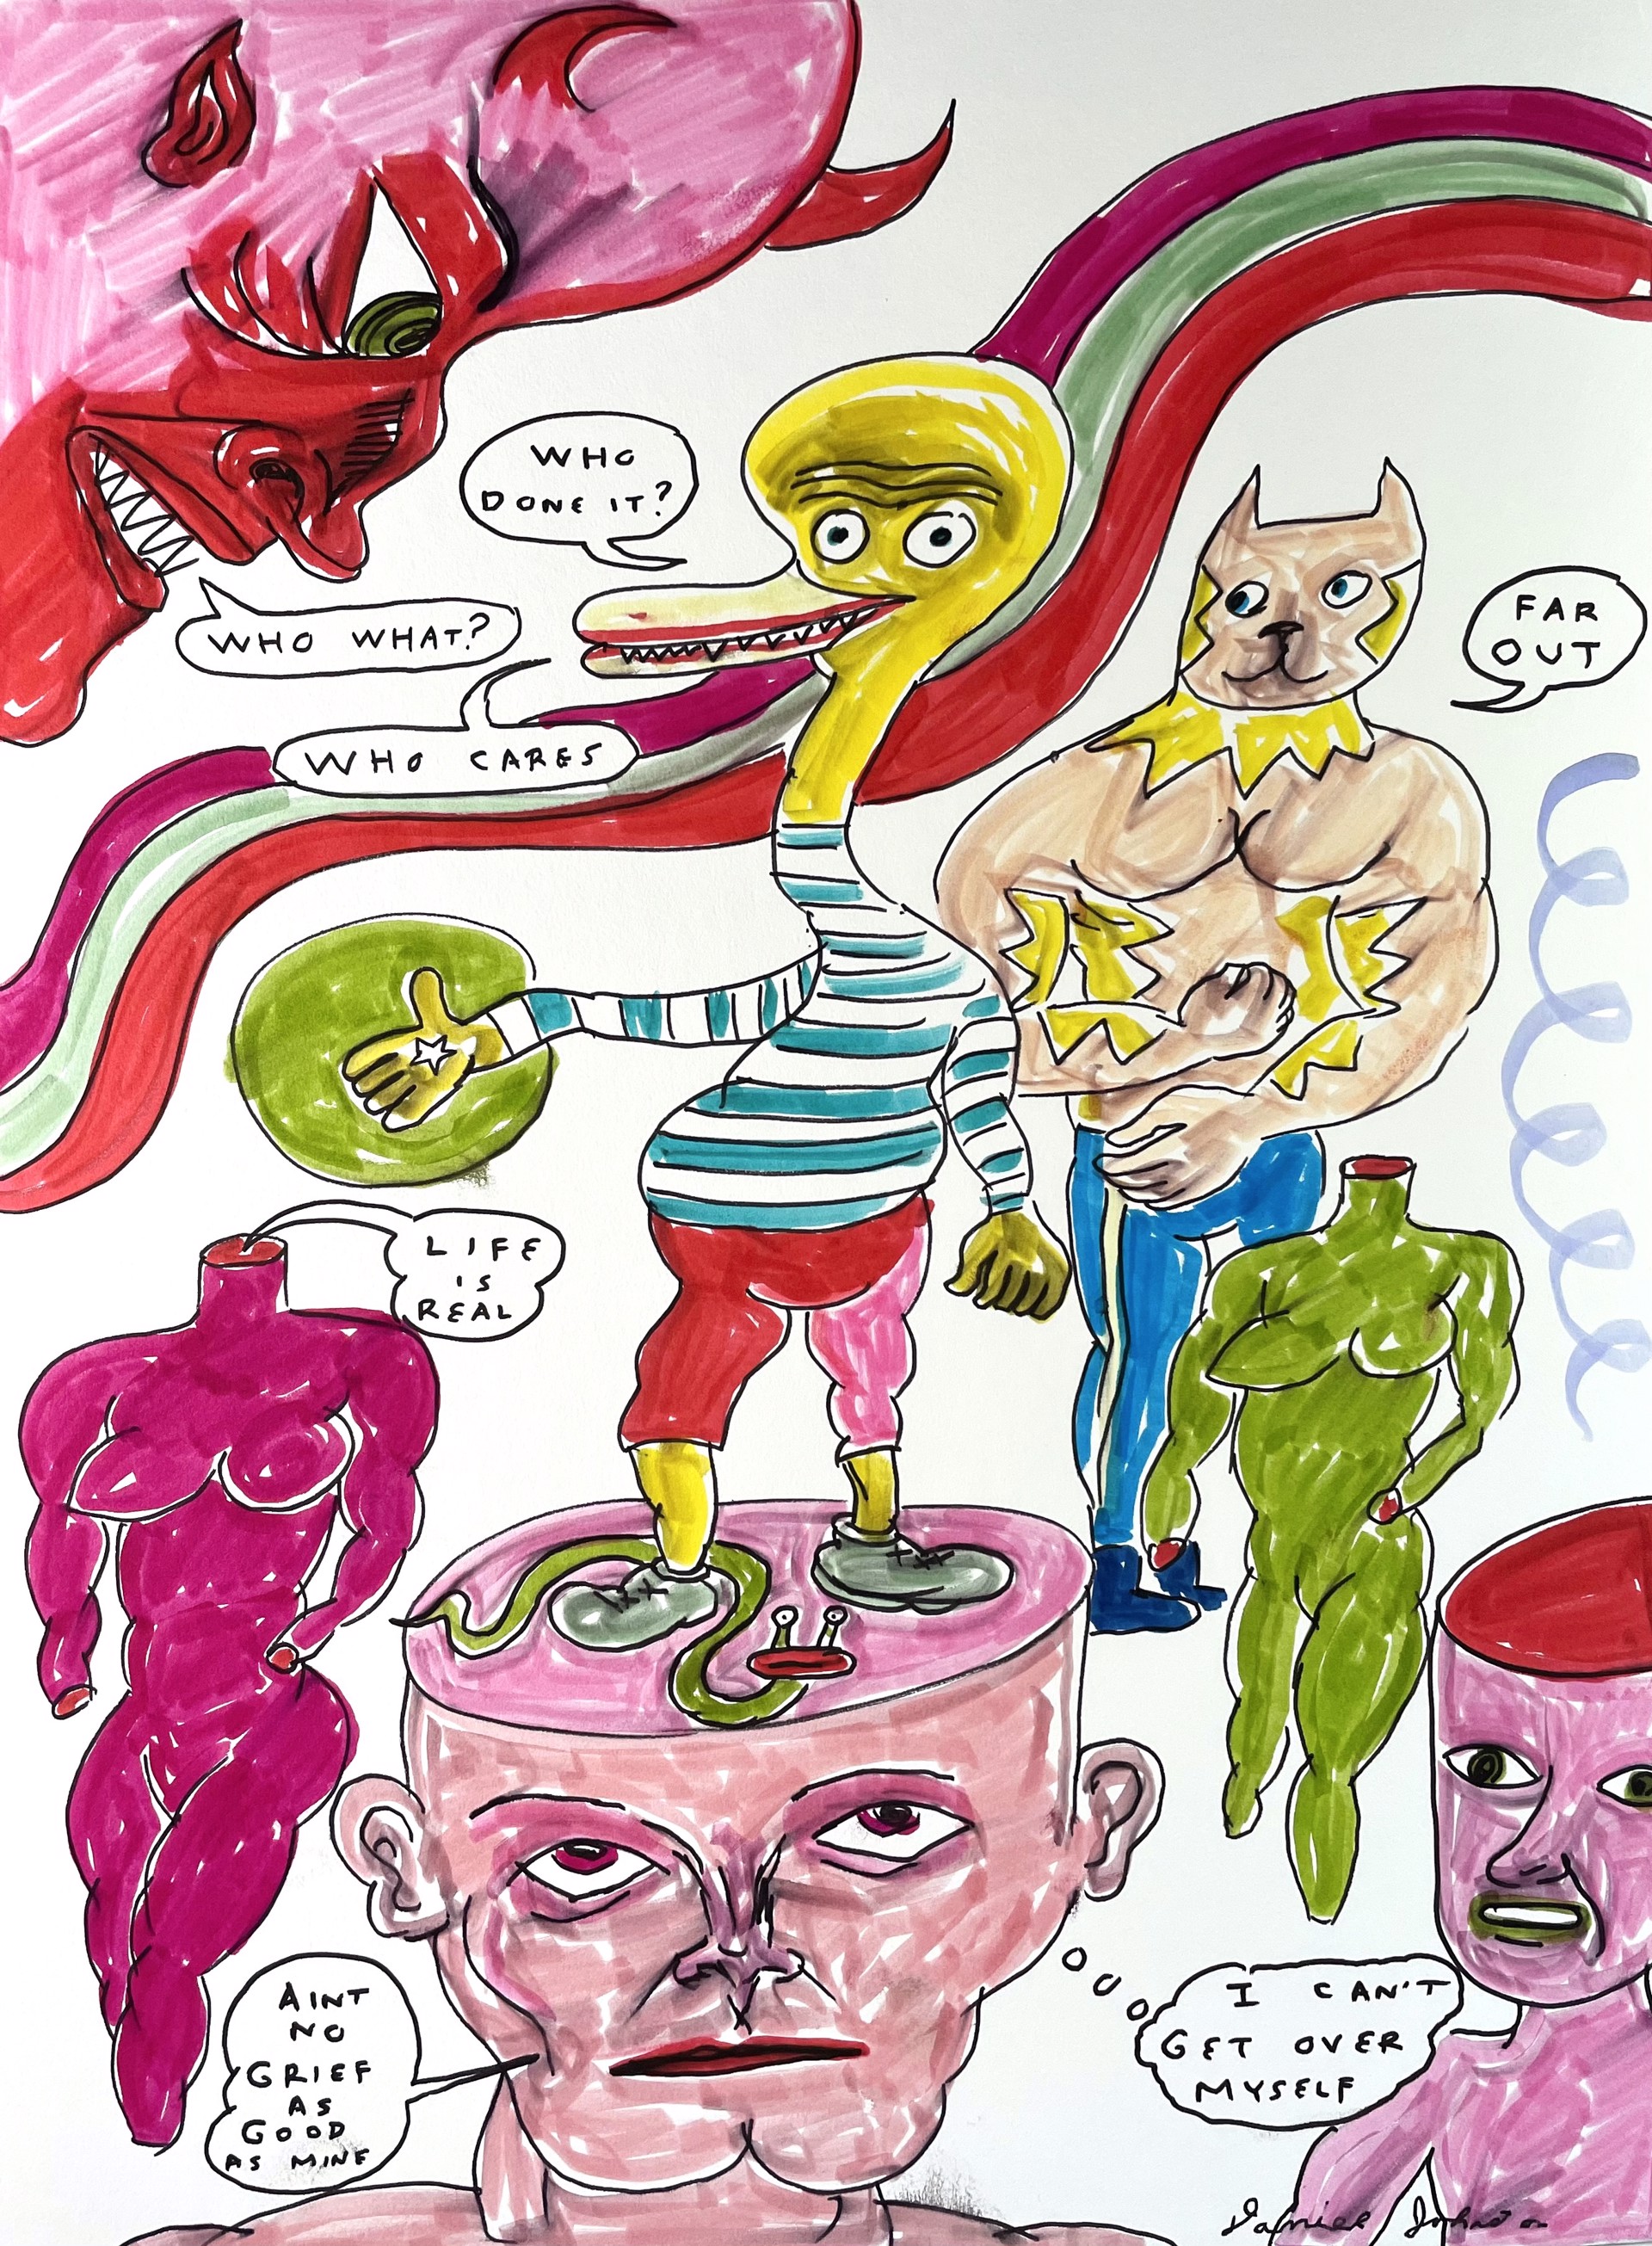 Who Done It? by Daniel Johnston